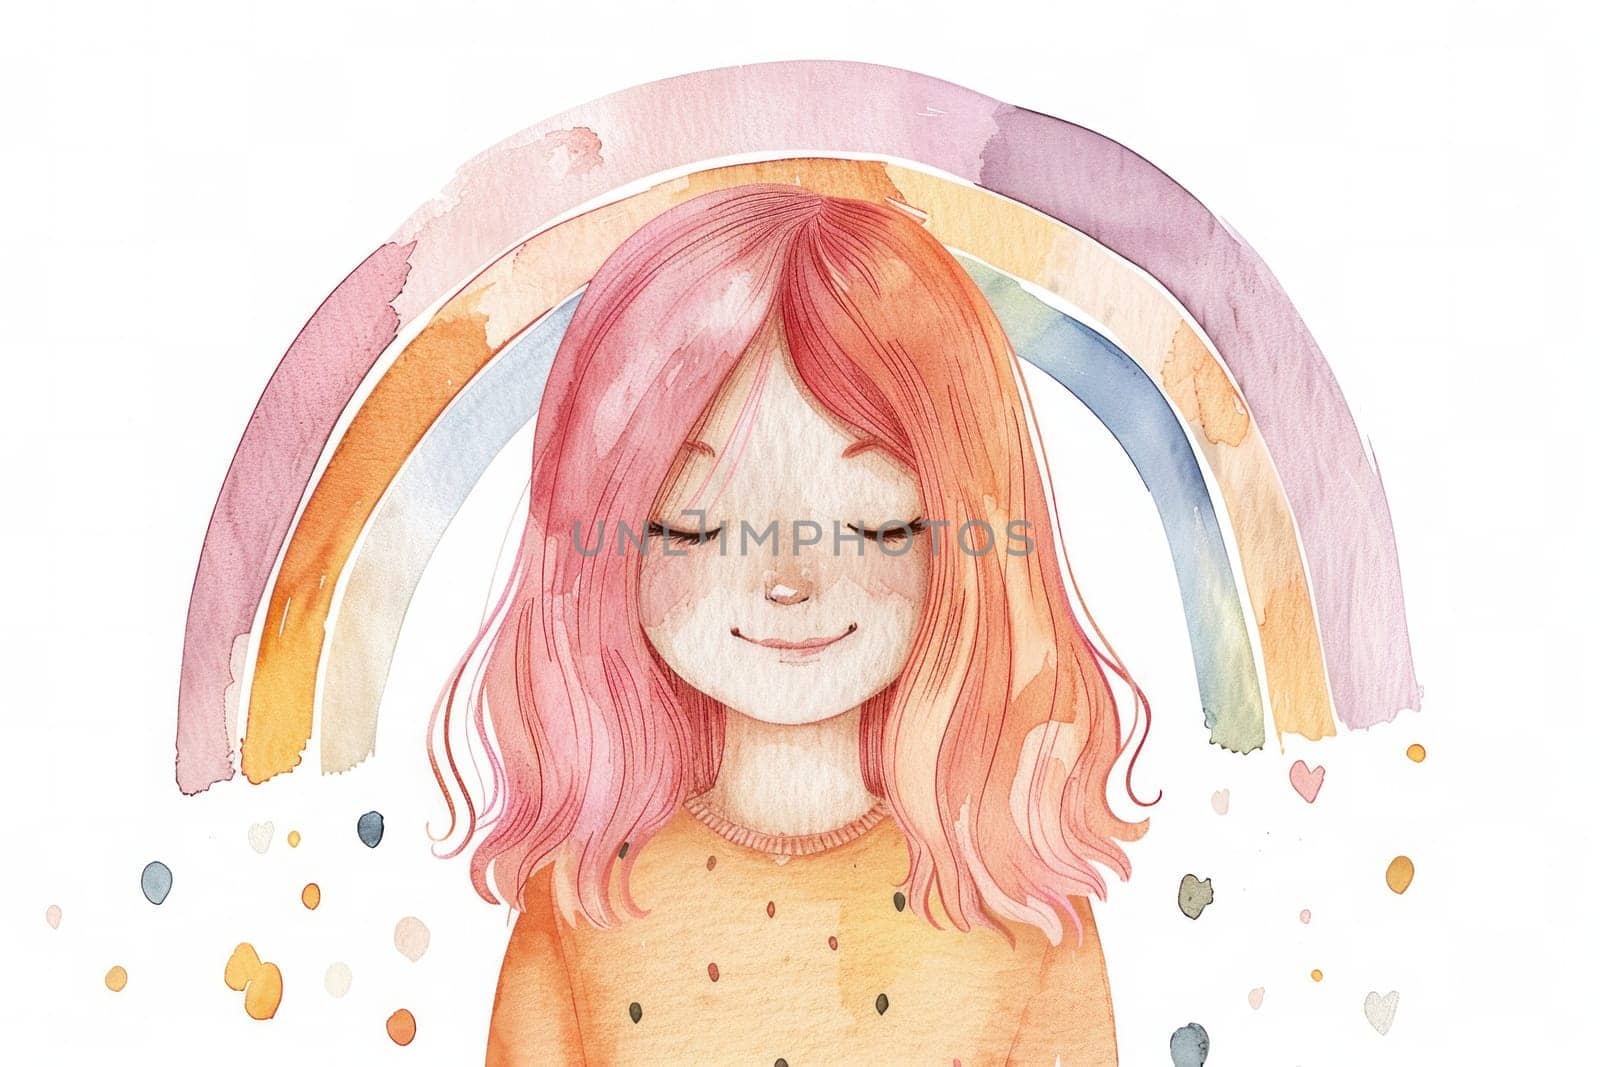 Rainbowhaired girl in a watercolor artwork representing beauty, art, fantasy, and creativity concept